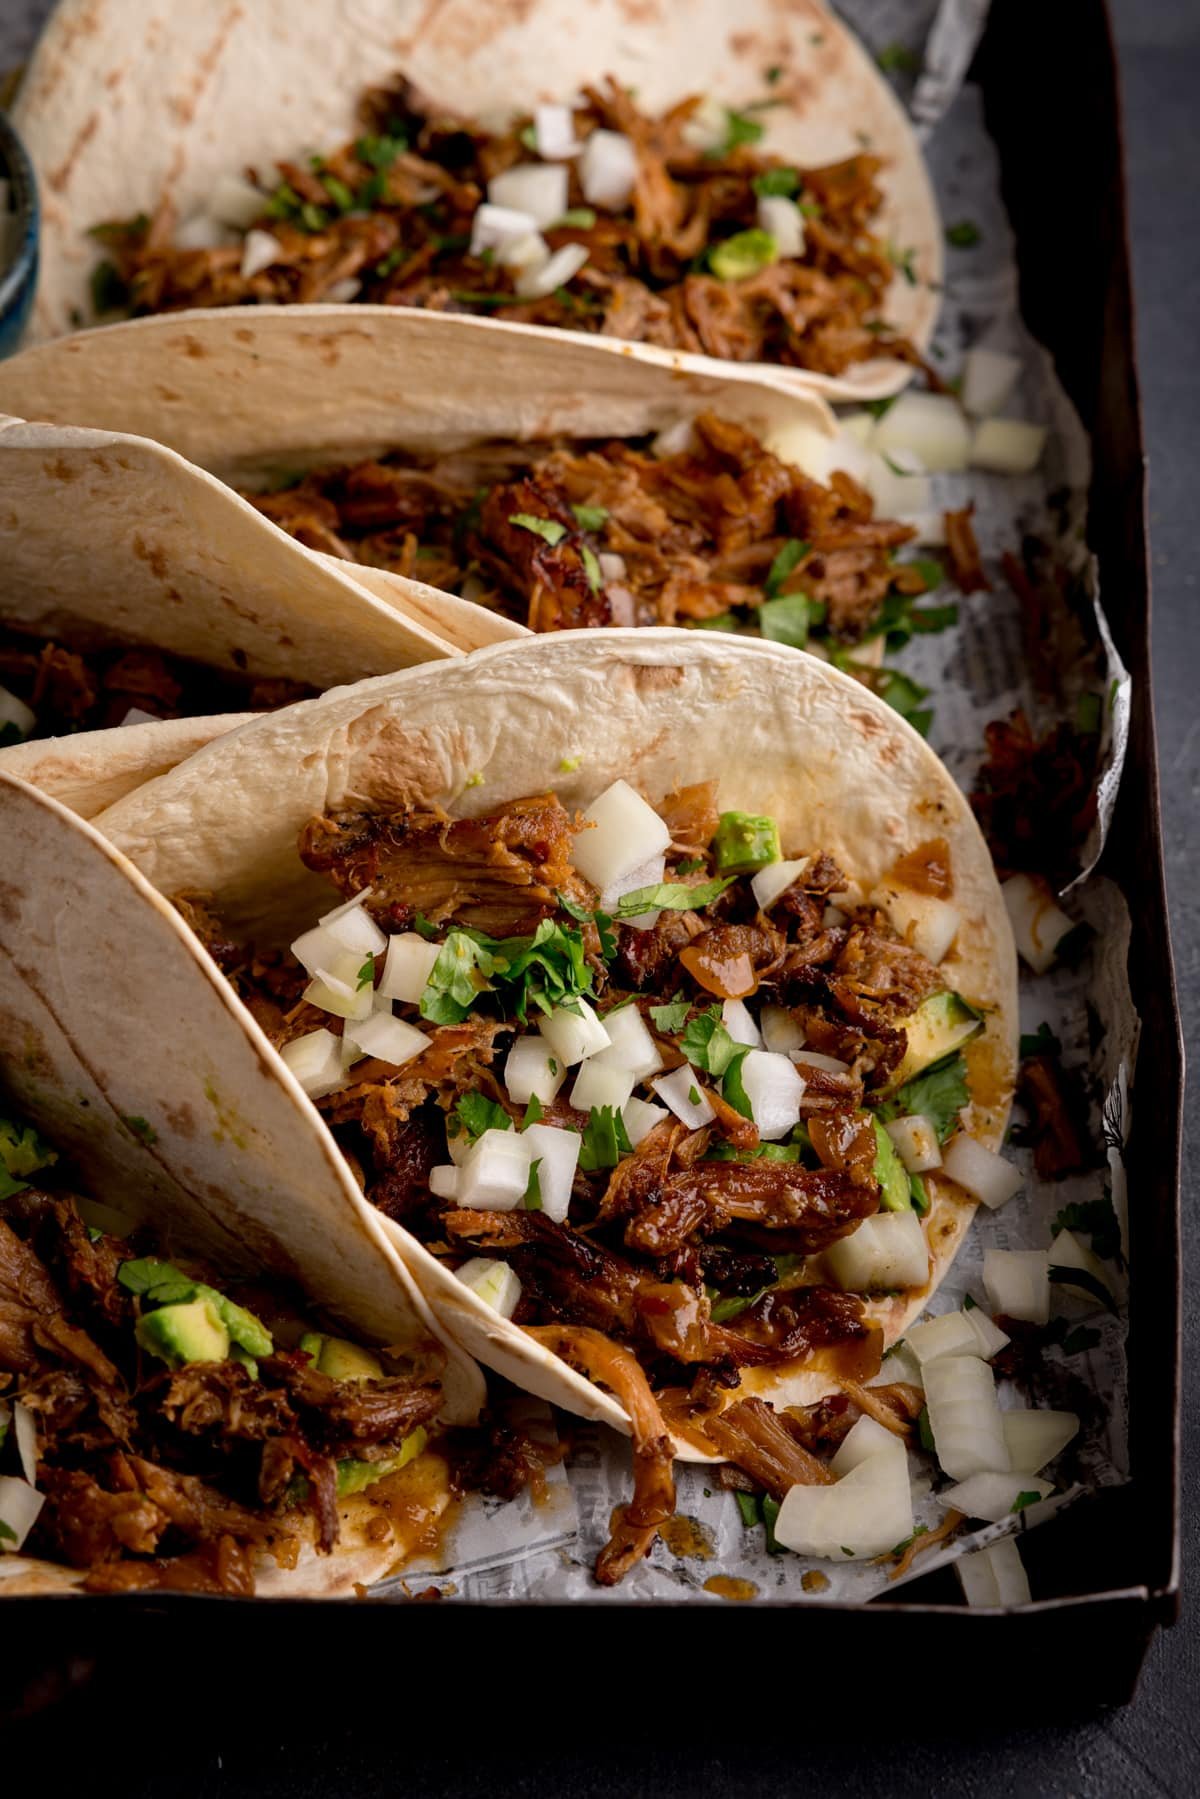 Tall close-up image of pork carnitas tacos on a tray, topped with chopped onion and coriander.